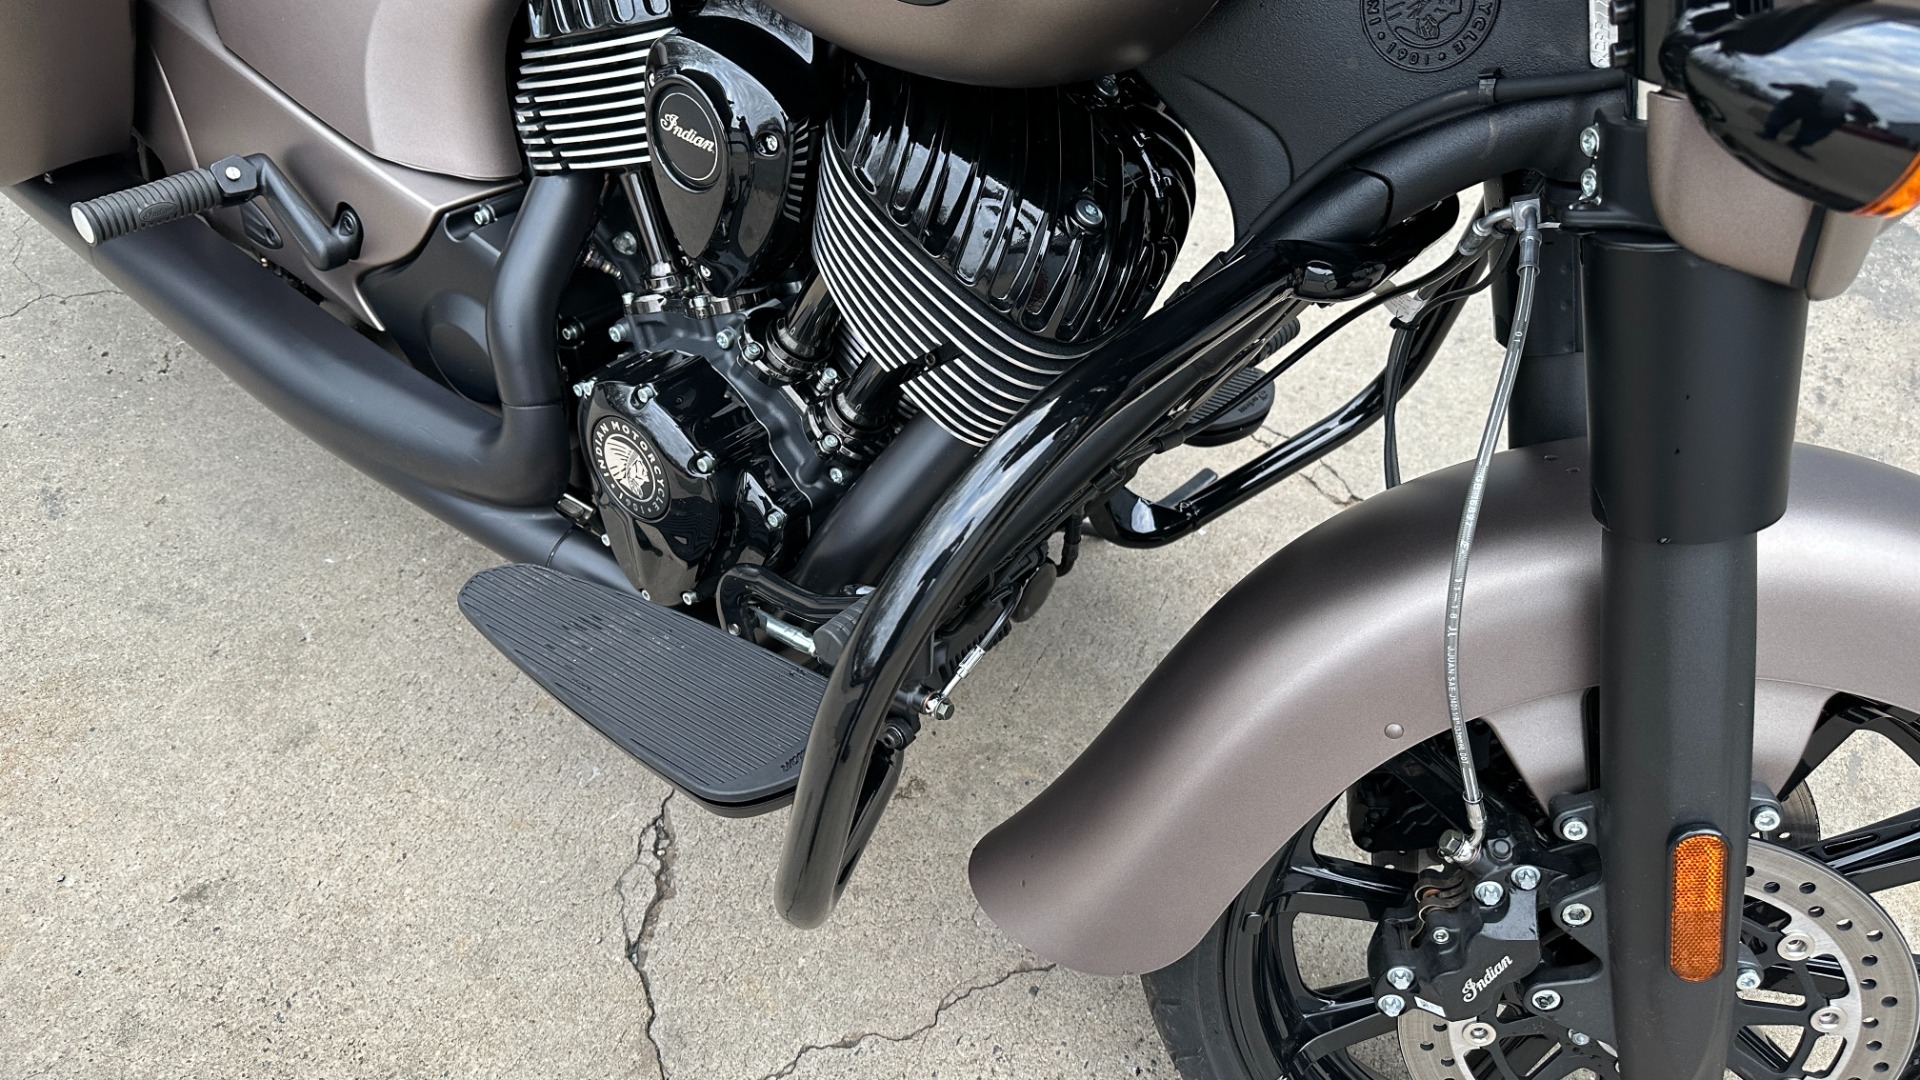 Used 2019 INDIAN CHIEFTAIN DARK HORSE / MATTE PAINT / LOW MILES / NAV / CRUISE CONTROL / TOUCHSCREEN for sale Sold at Formula Imports in Charlotte NC 28227 27